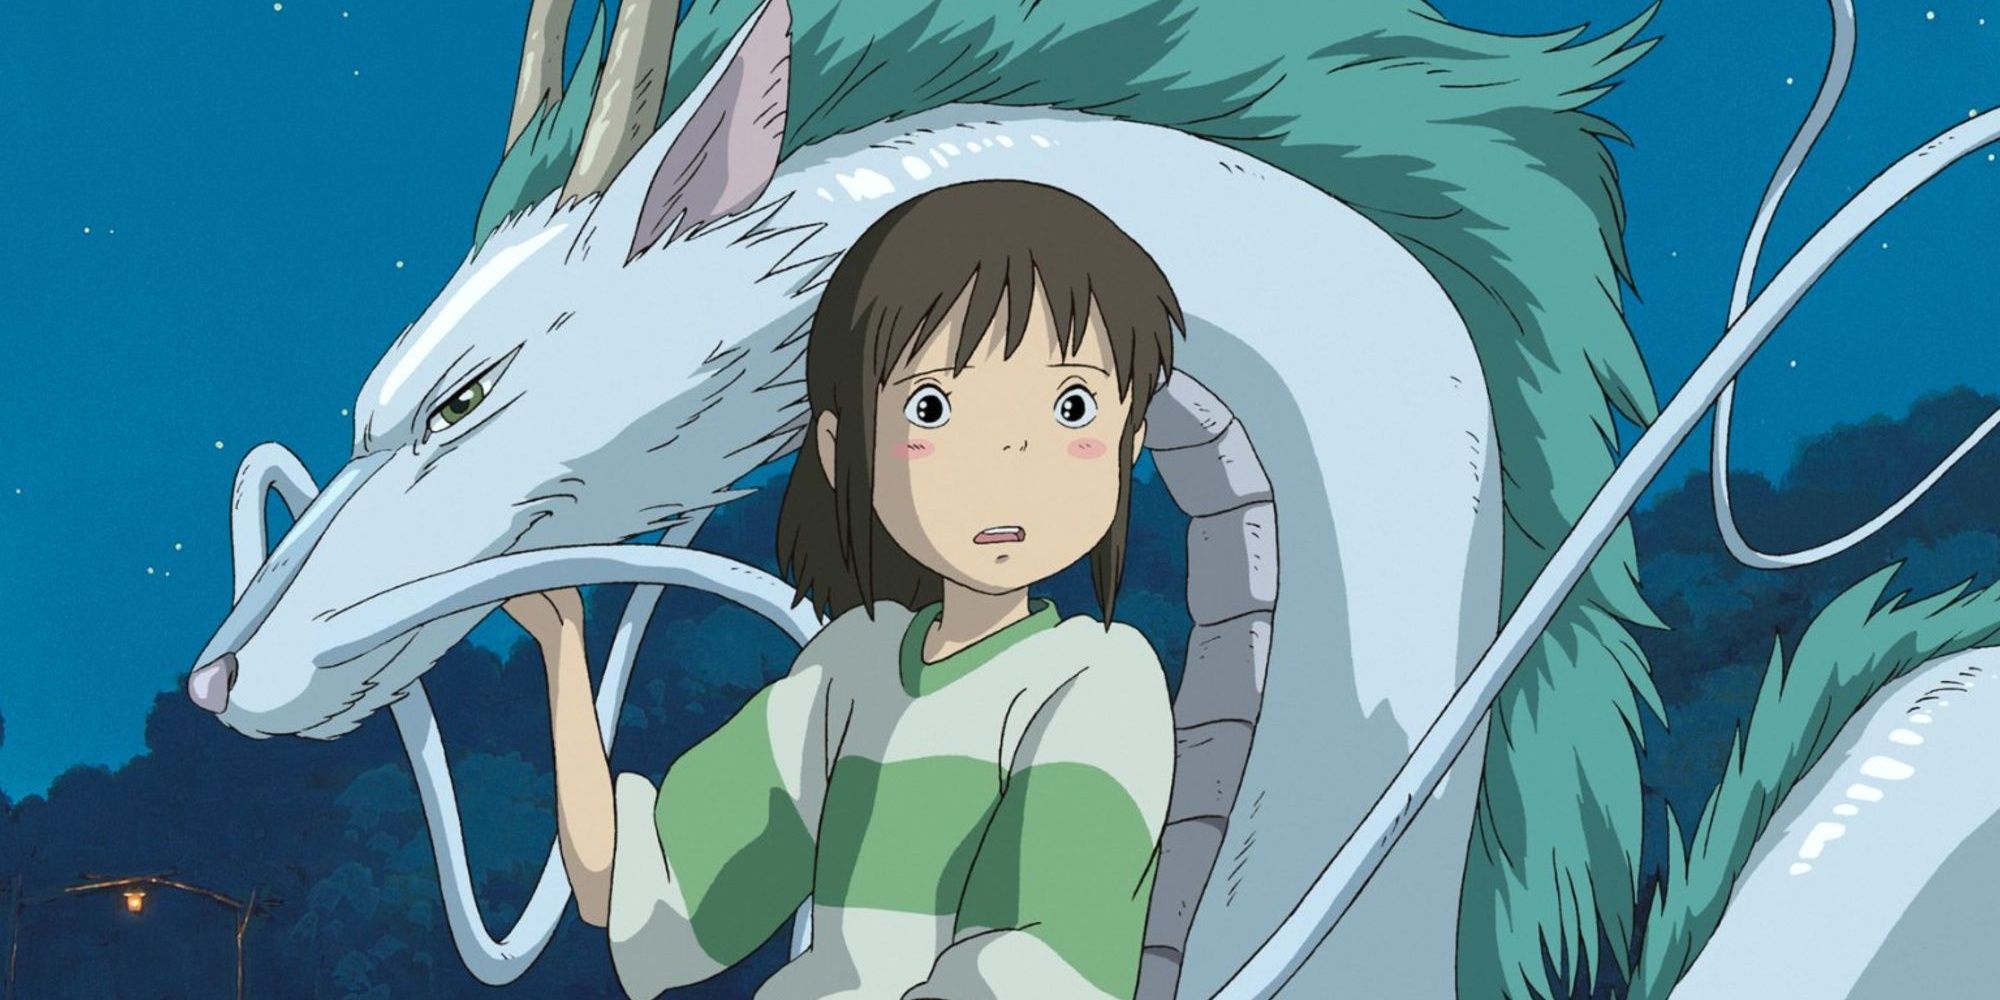 Chihiro holds a dragon and looks at something offscreen in Spirited Away.